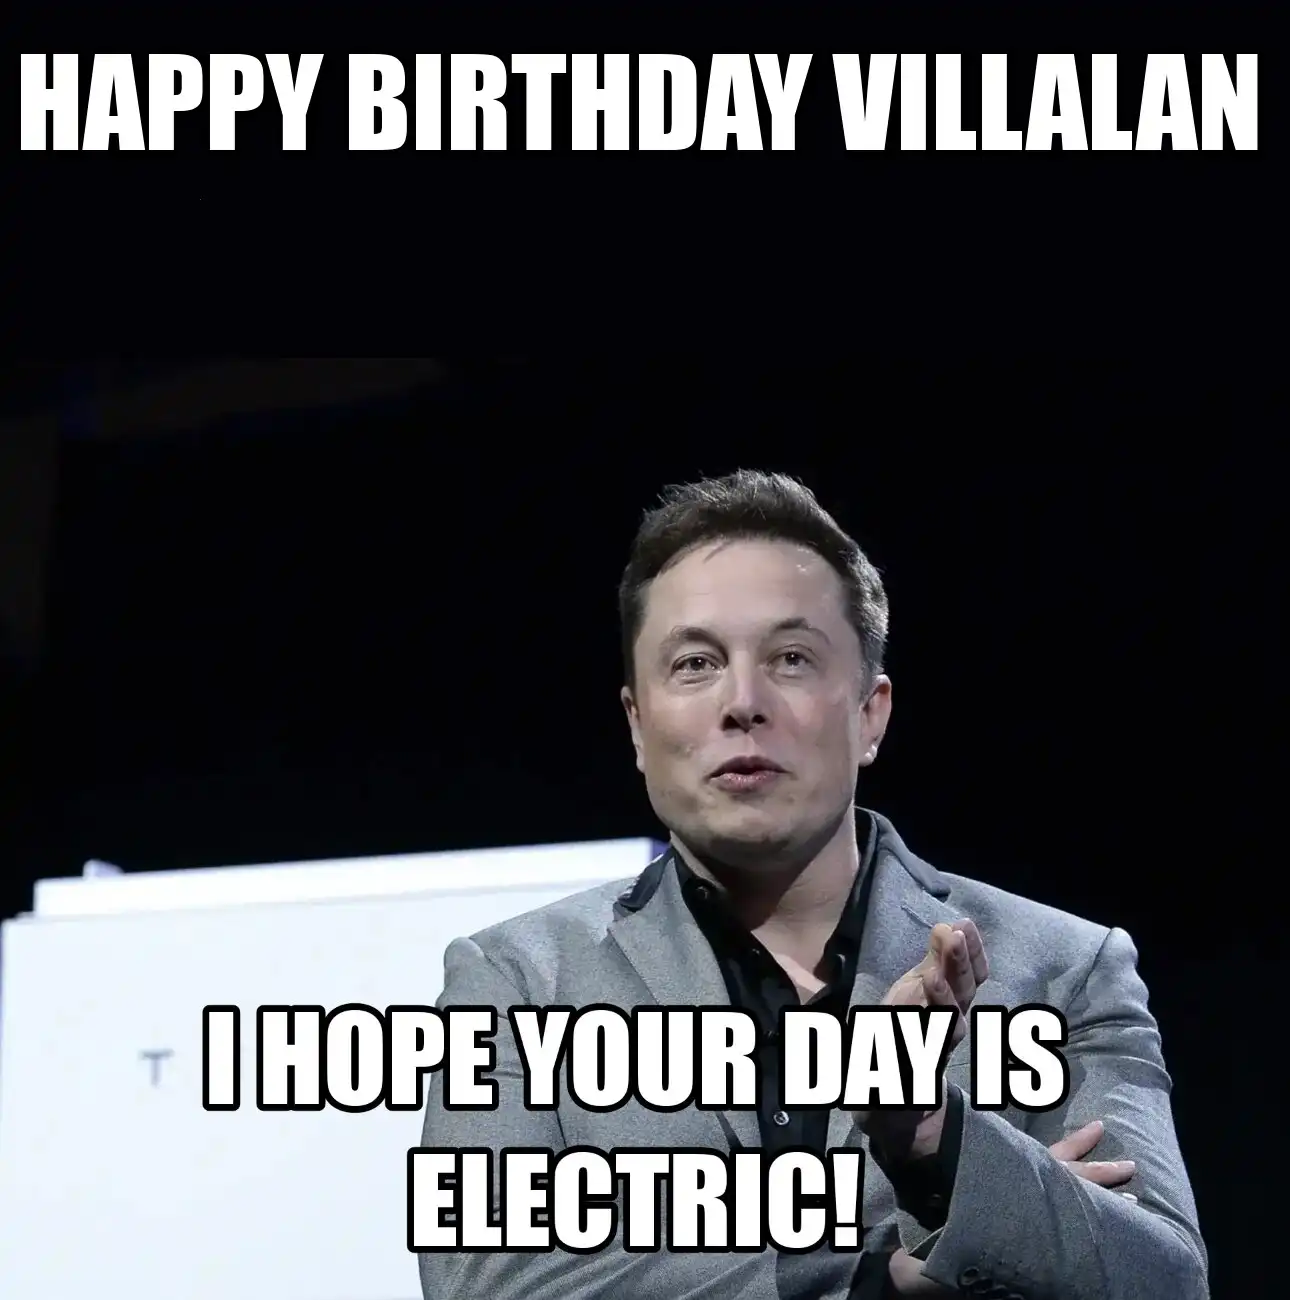 Happy Birthday Villalan I Hope Your Day Is Electric Meme